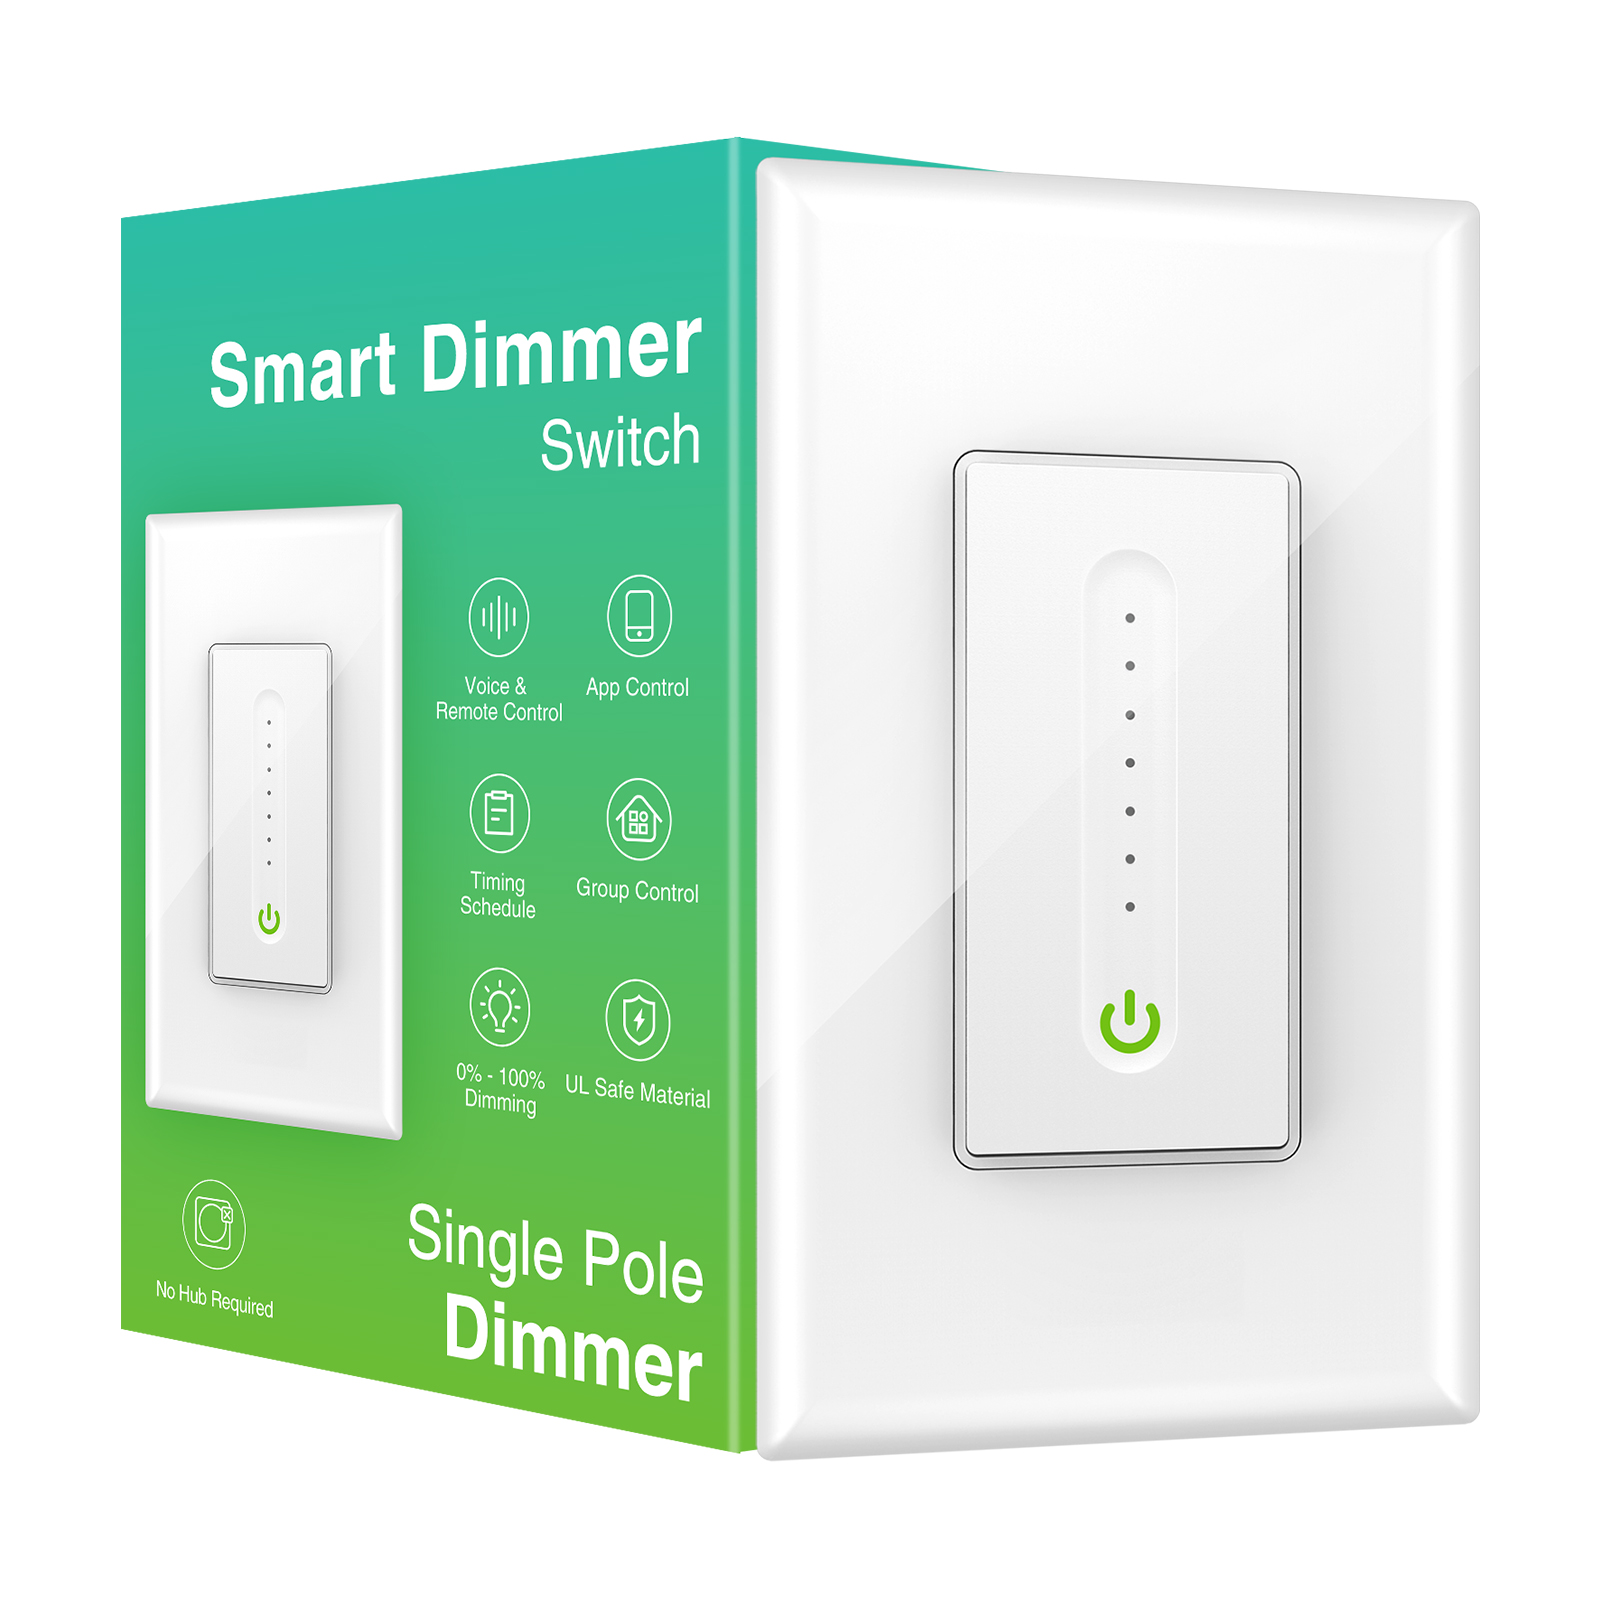 Dimmer Switch (latest model)